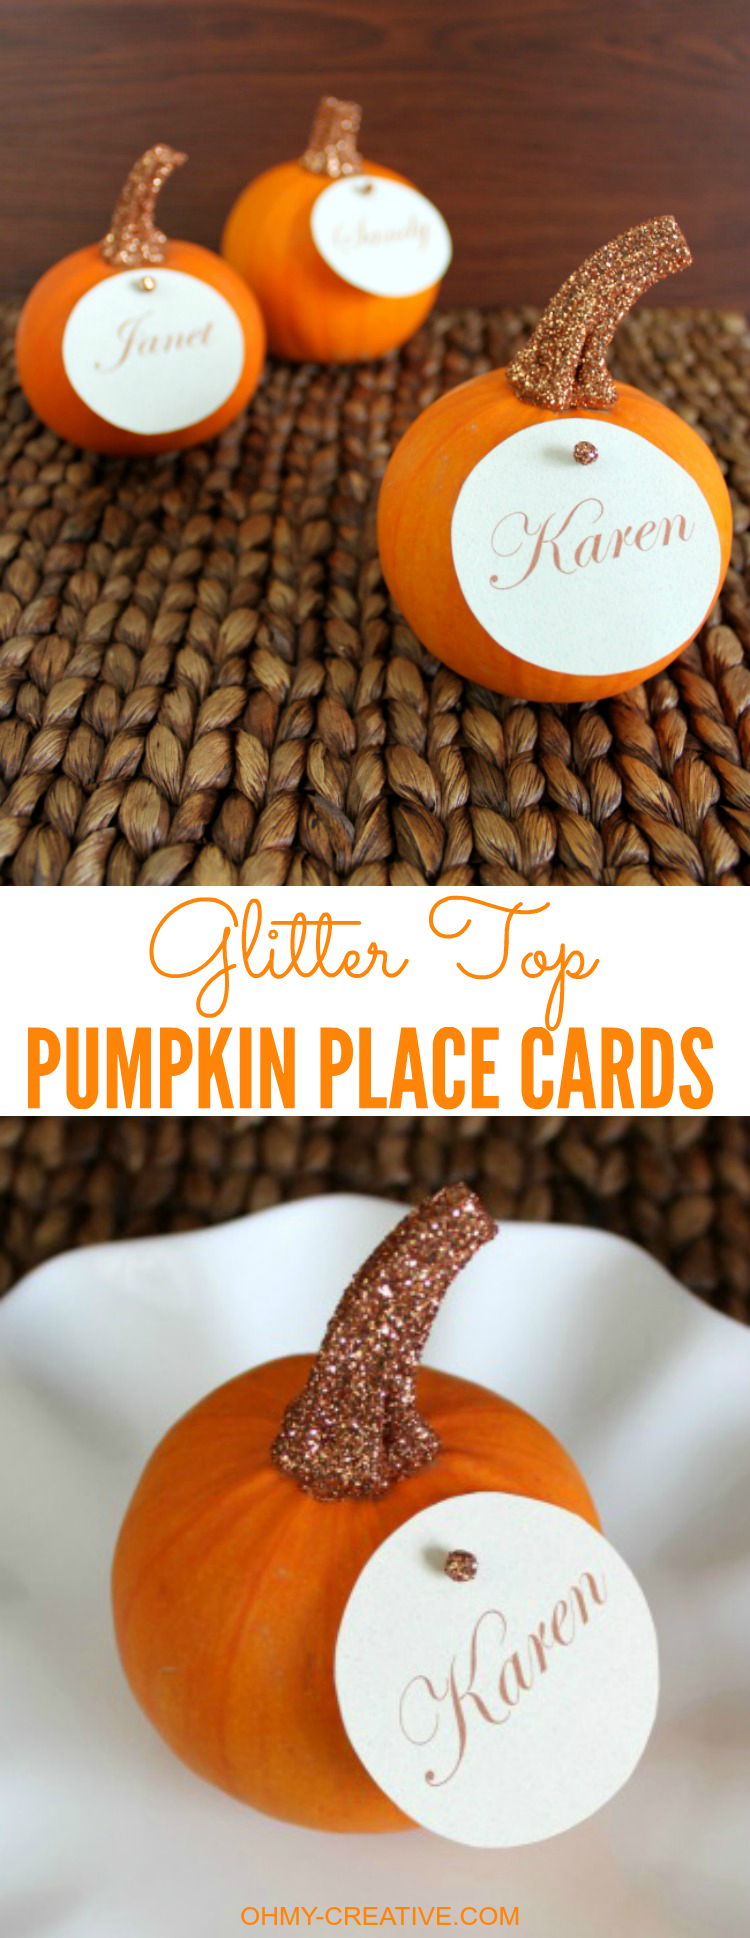 Easy to Create Glitter Top Pumpkin Place Cards for Fall or Thanksgiving entertaining | OHMY-CREATIVE.COM